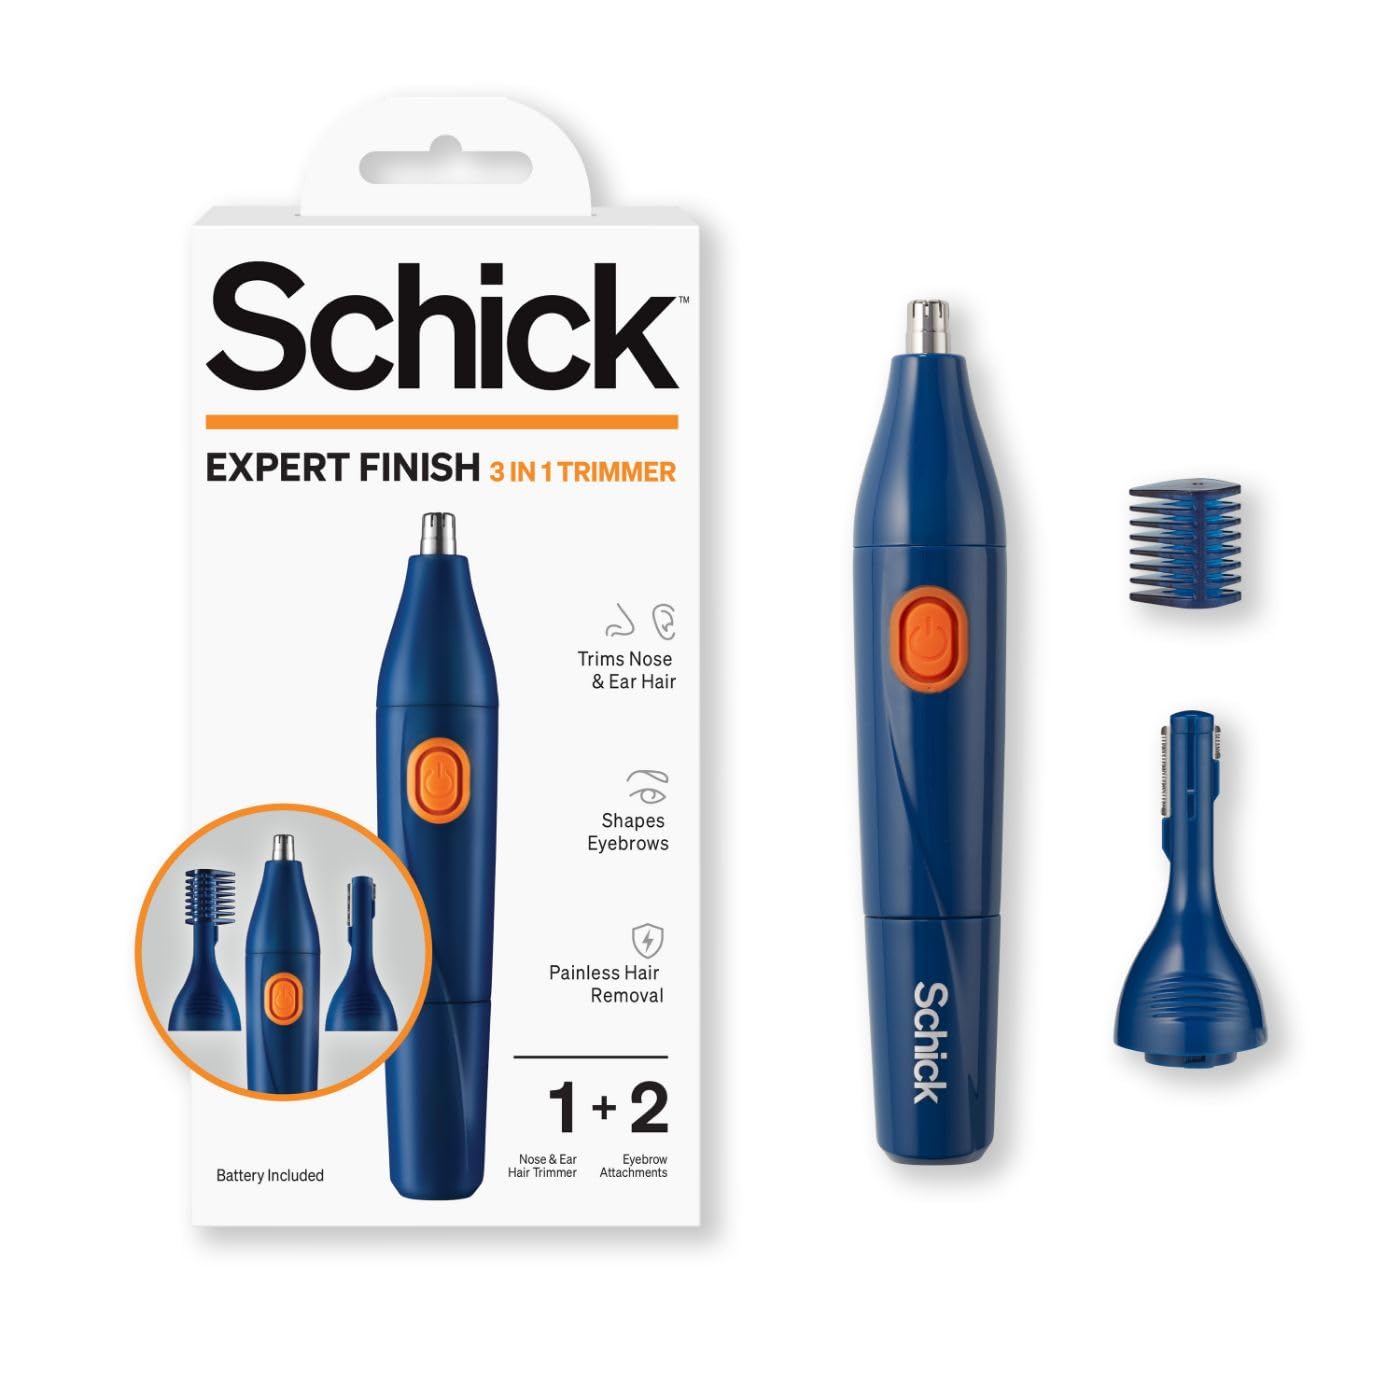 Schick Expert Finish 3-in-1 Trimmer | Nose and Ear Trimmer, Eyebrow Trimmer for Men, Electric Trimmer for Painless Hair Removal, Nose Clippers, Brow Trimmer, Cordless Trimmer